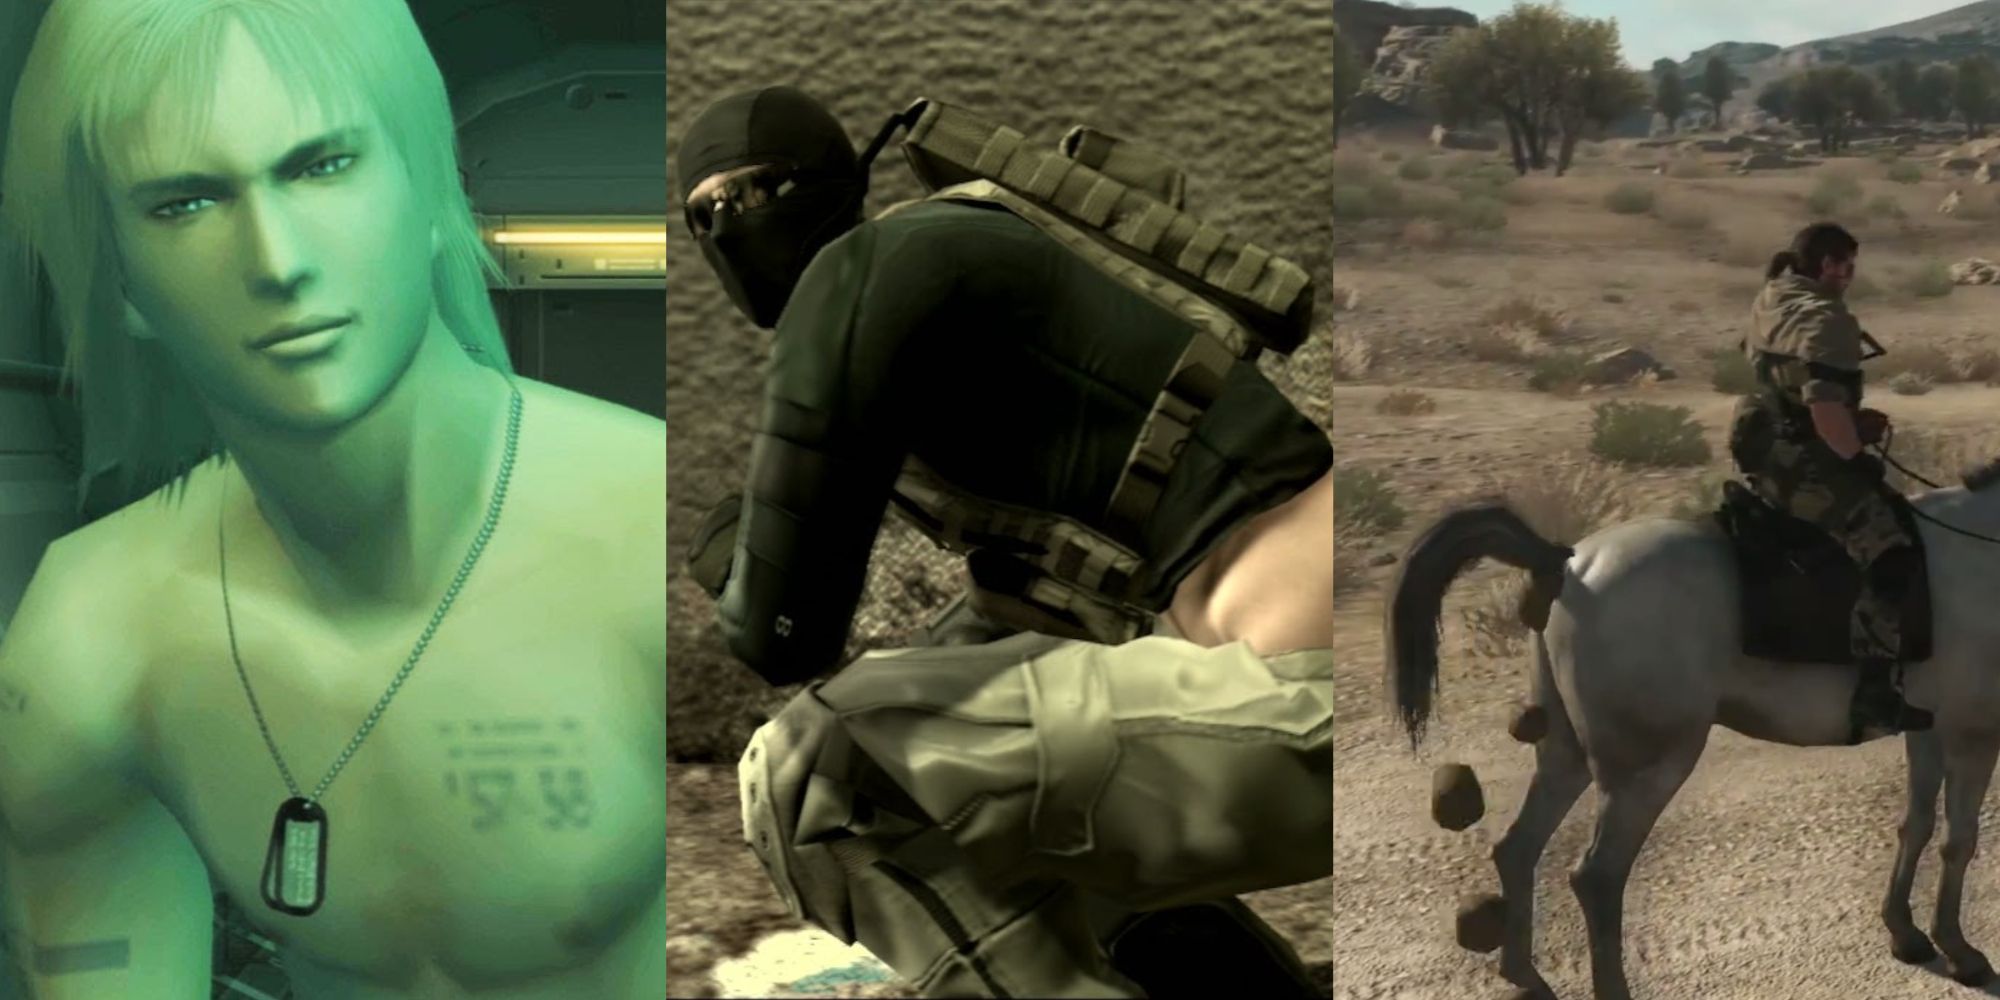 Metal Gear Solid series split image showing a Raiden, Johnny, and Big Boss on a horse.